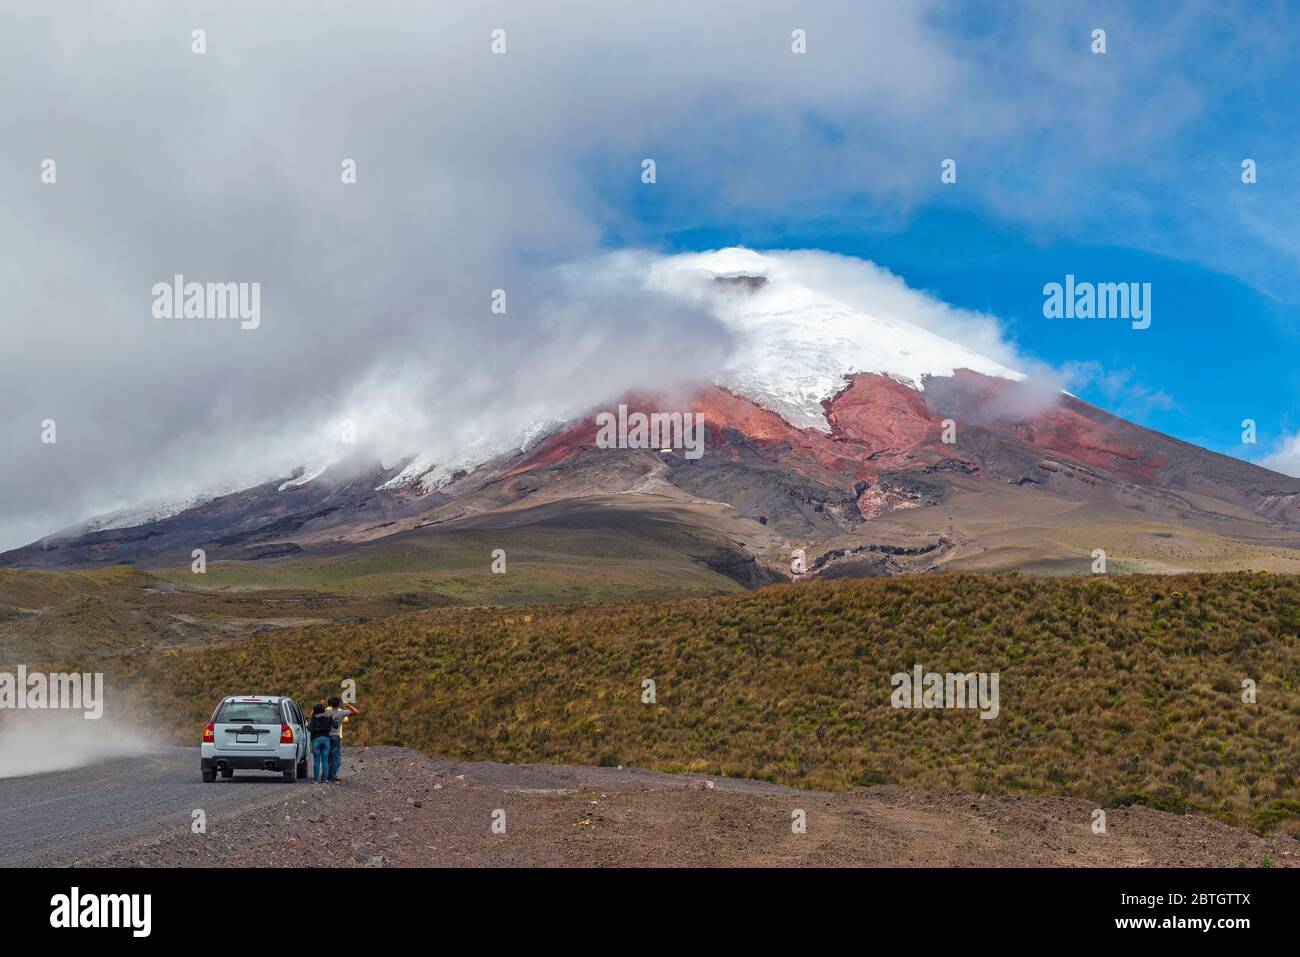 Tourists stopping by a dirt road with their vehicle to enjoy the view over the snowcapped peak of the active Cotopaxi Volcano, Quito, Ecuador. Stock Photo